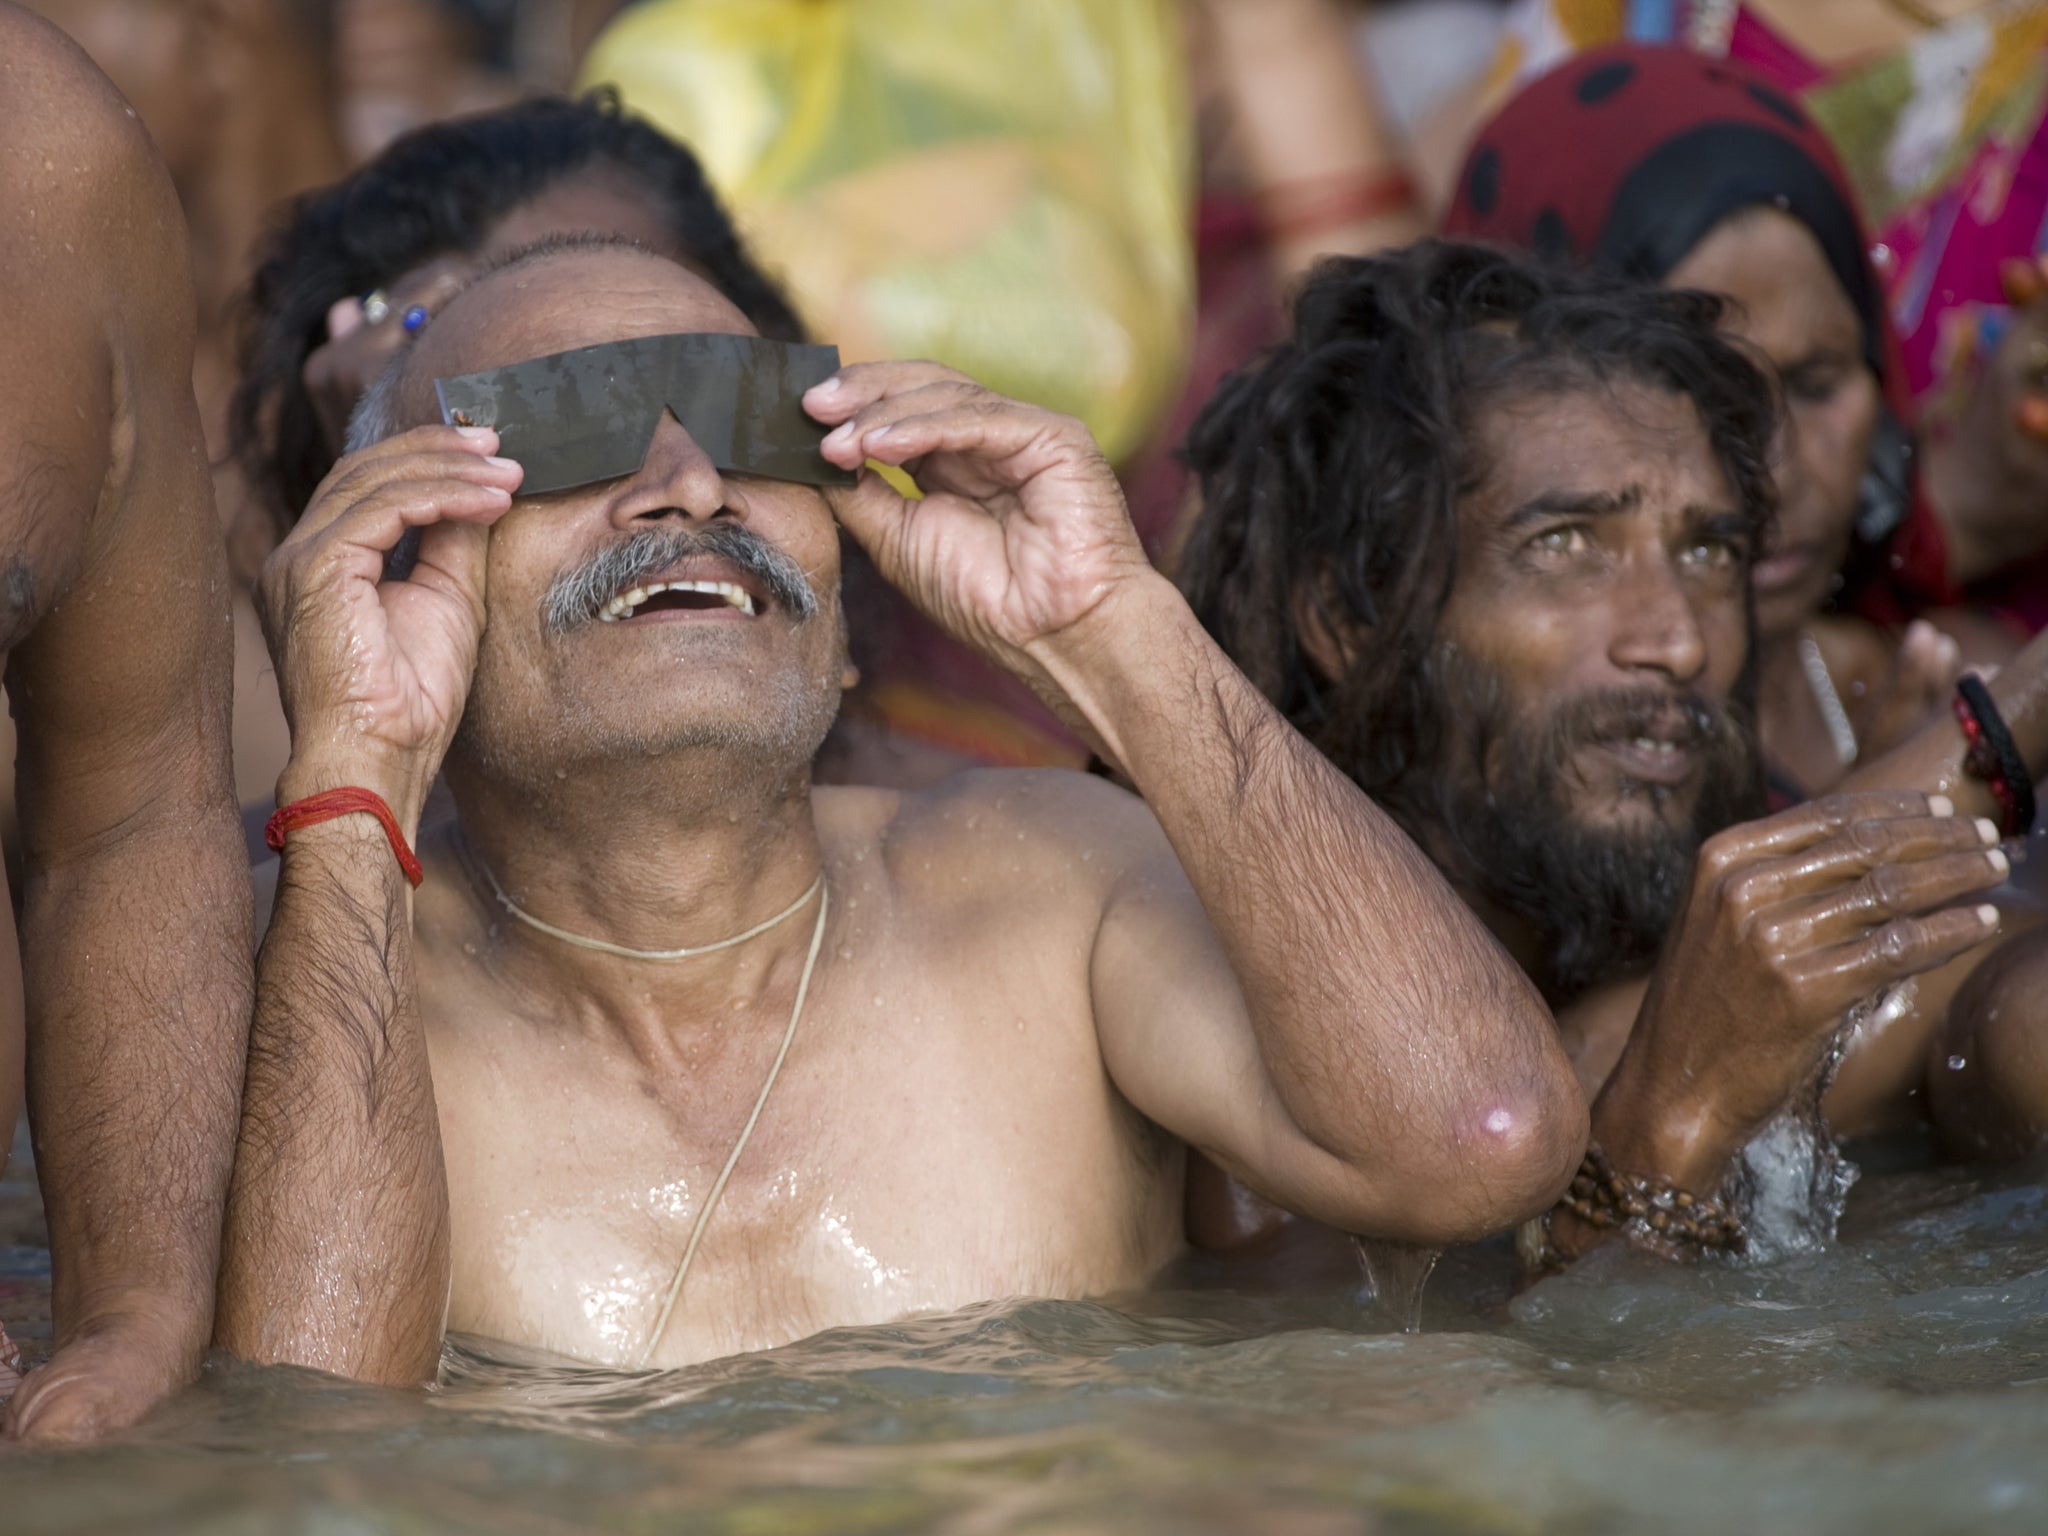 A Hindu man watches a solar eclipse as he takes a bath in the Ganges river in the Indian city of Varanasi on July 22, 2009. The longest solar eclipse of the 21st century cast a shadow over much of Asia, plunging hundreds of millions into darkness across the giant land masses of India and China